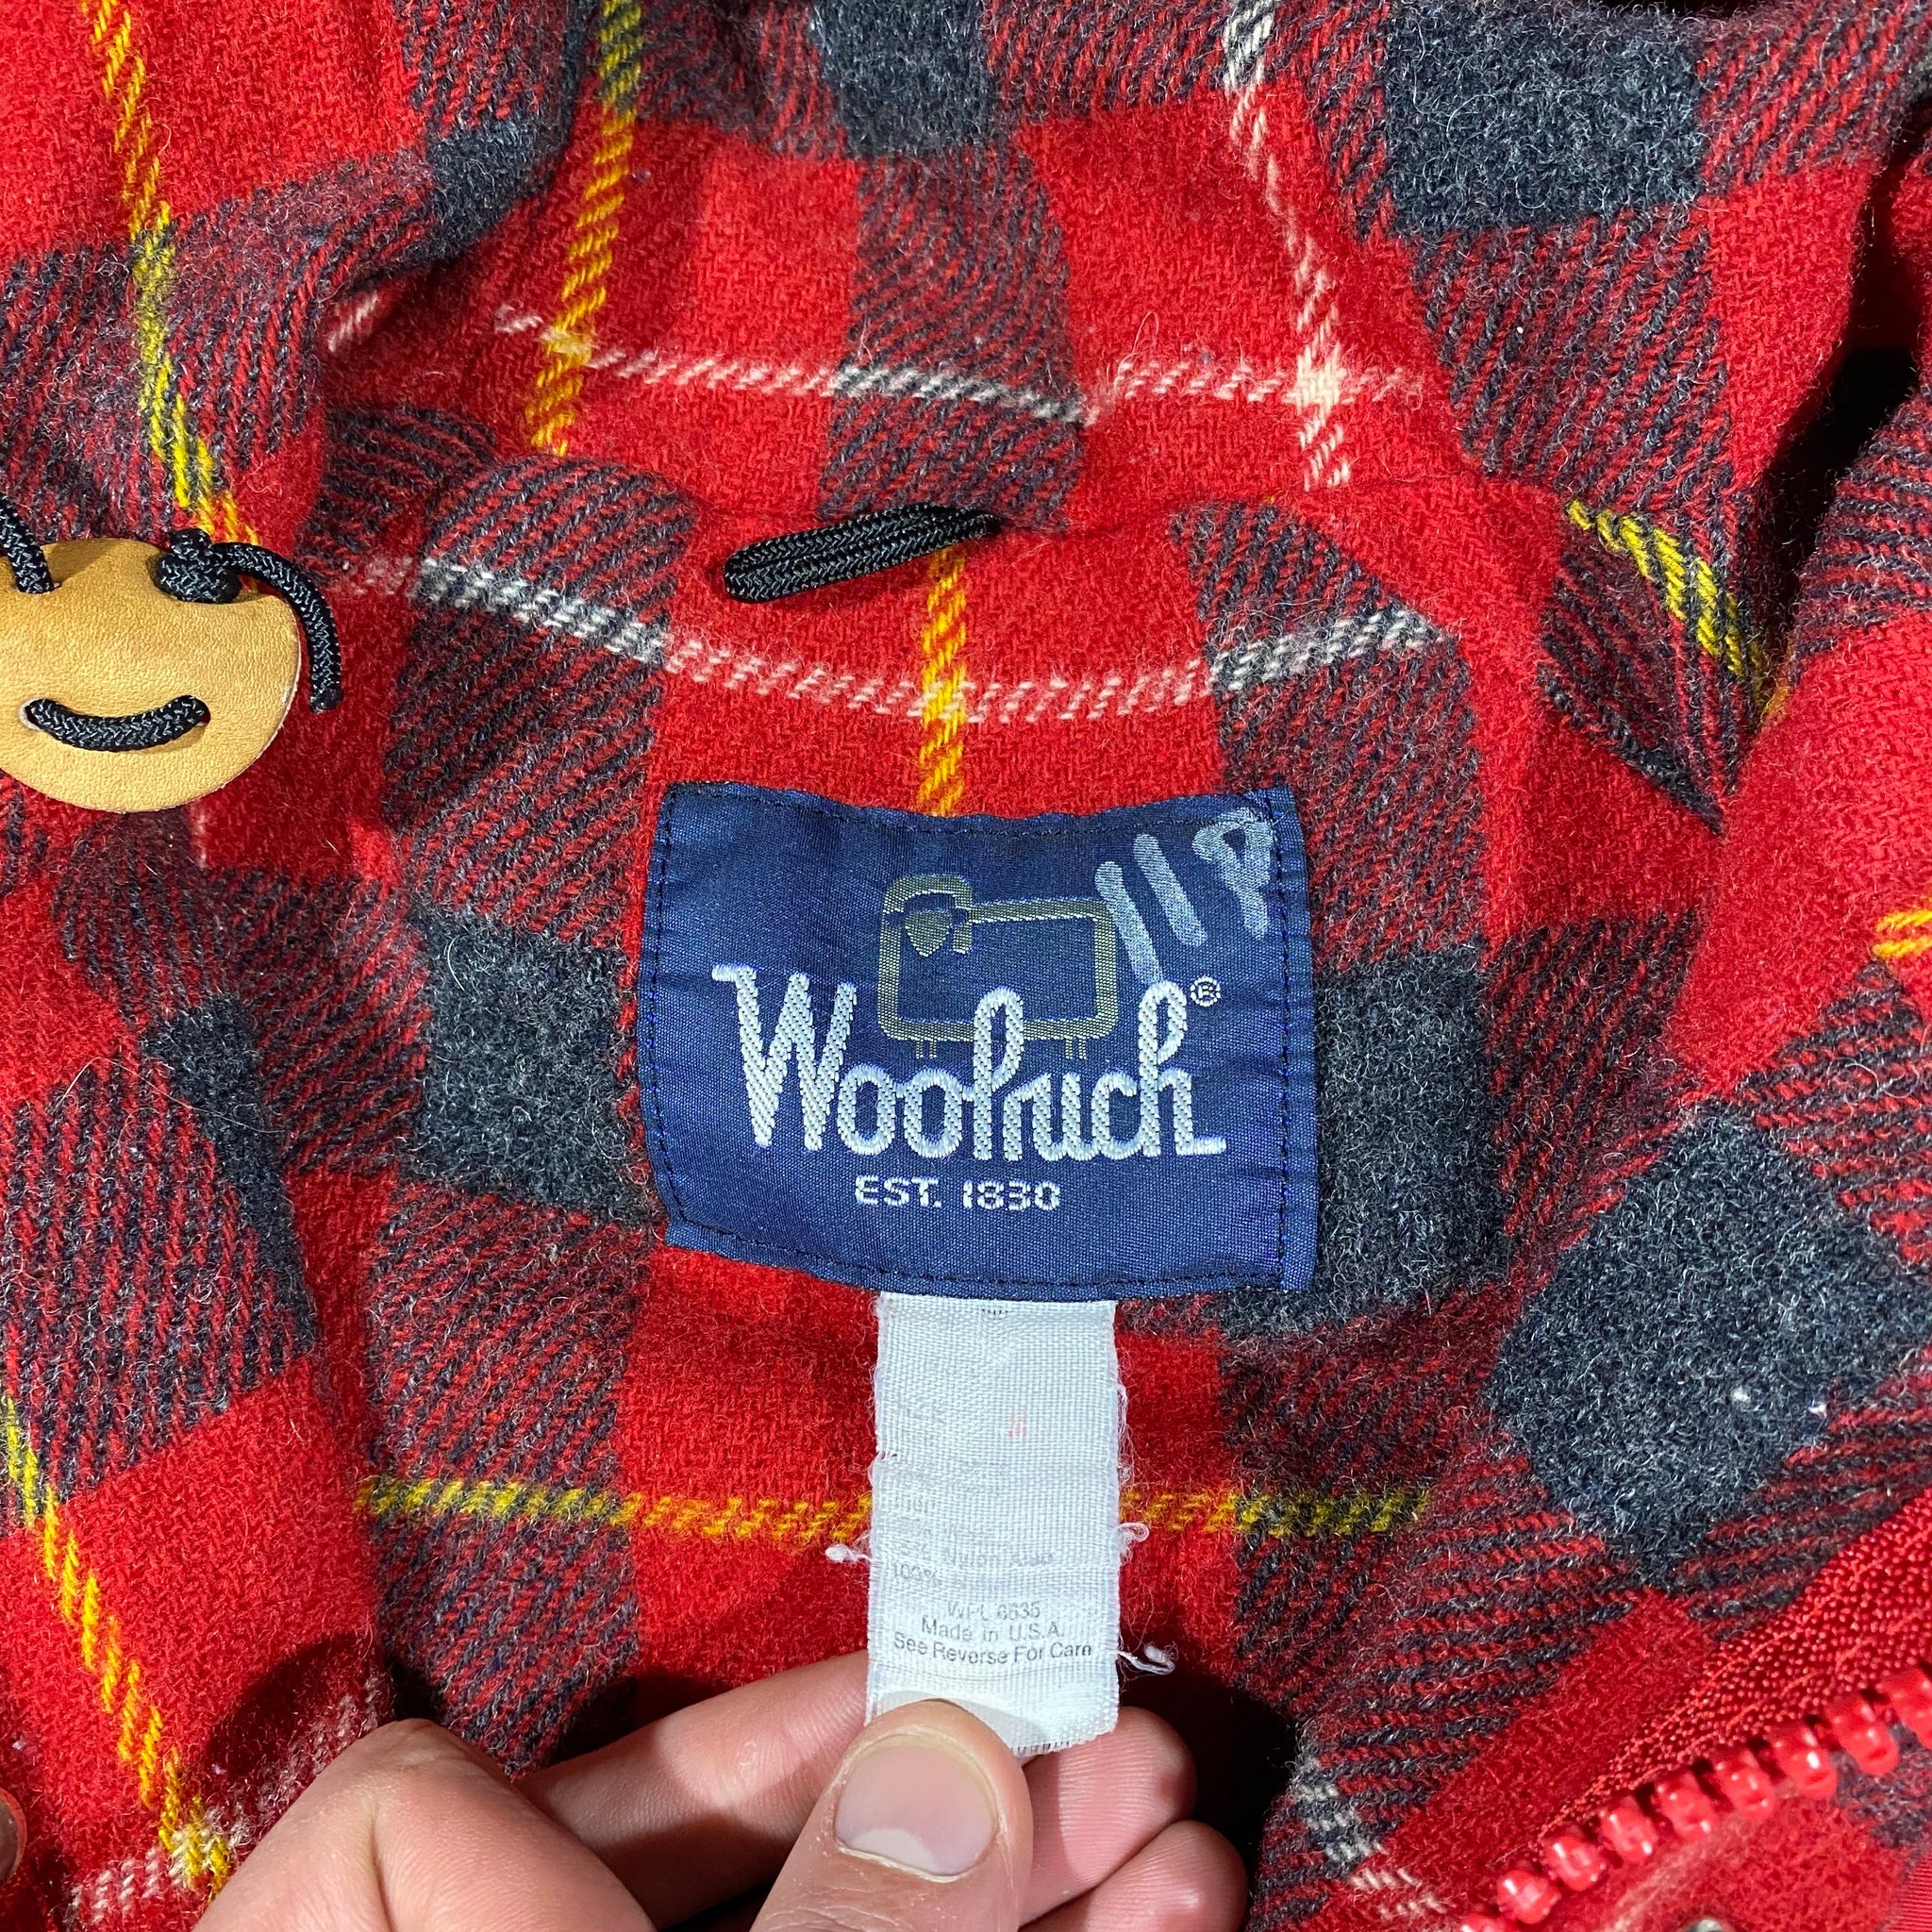 80’s Woolrich red jacket. Small fit